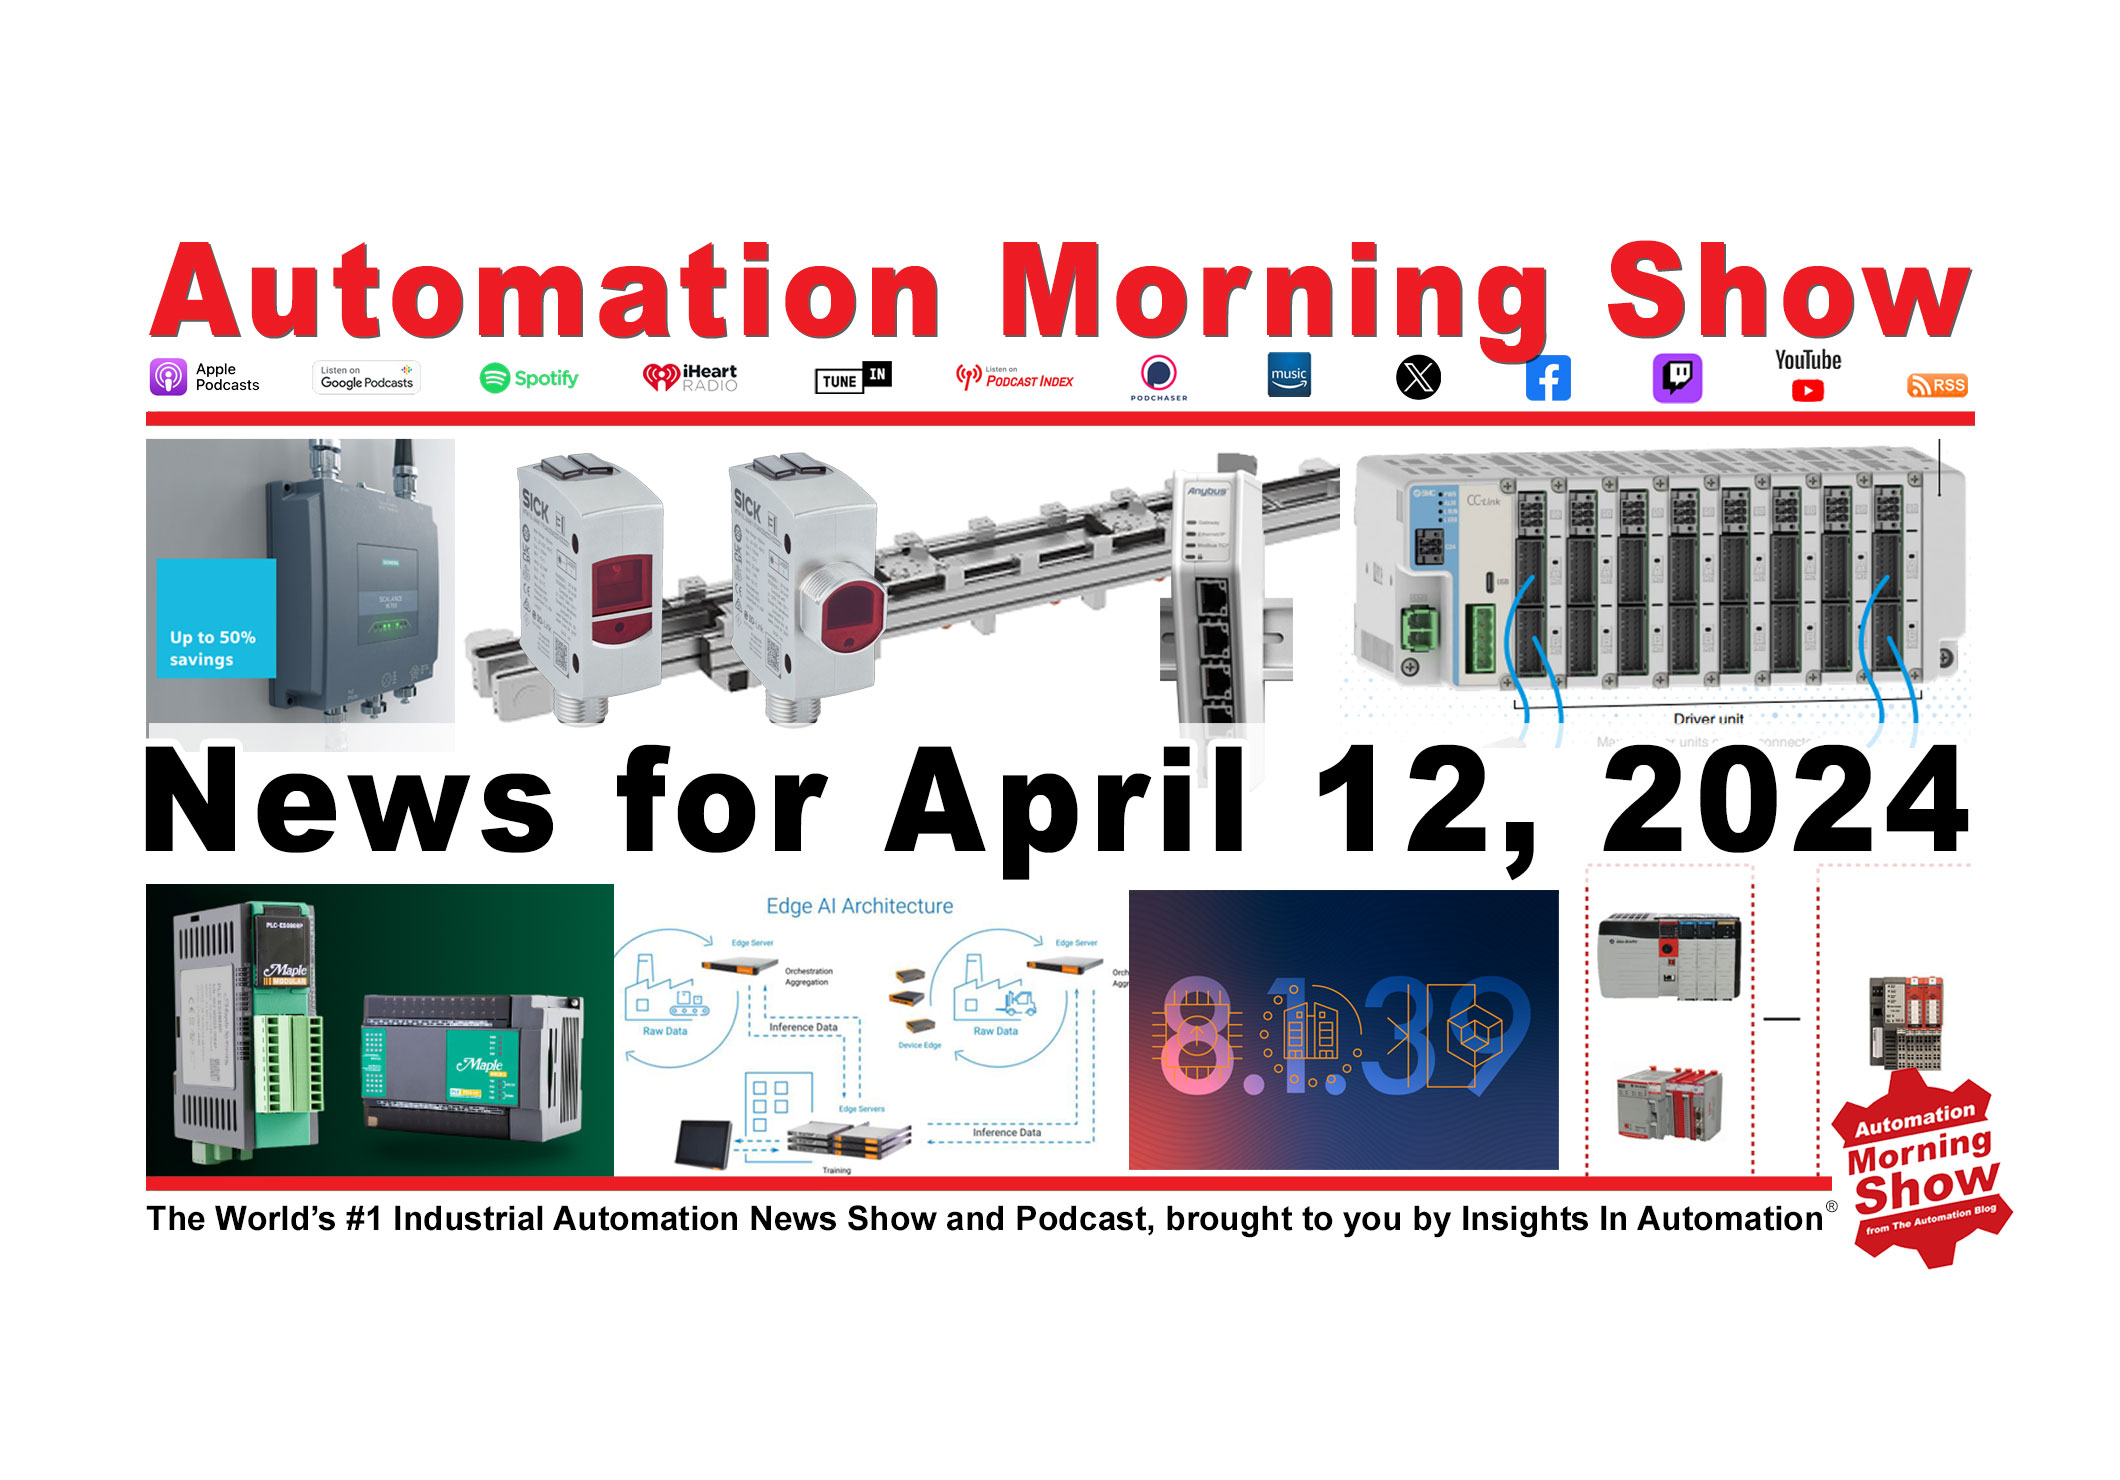 Automation Morning Show for April 12, 2024 (N173)